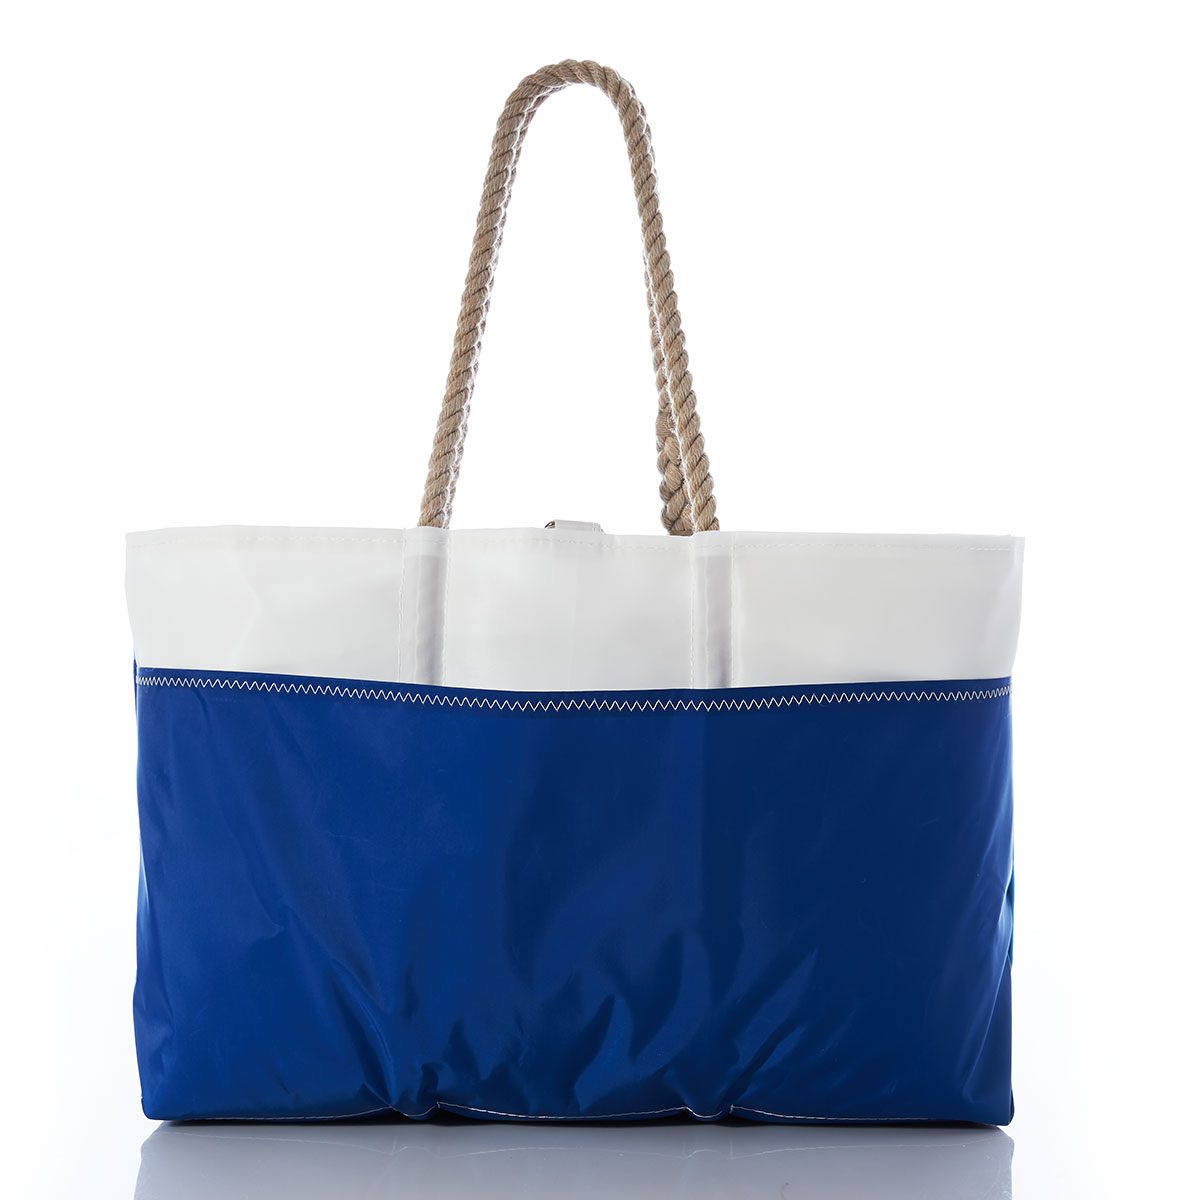 back view of a recycled sail cloth ogunquit beach tote showing the dark blue back pocket